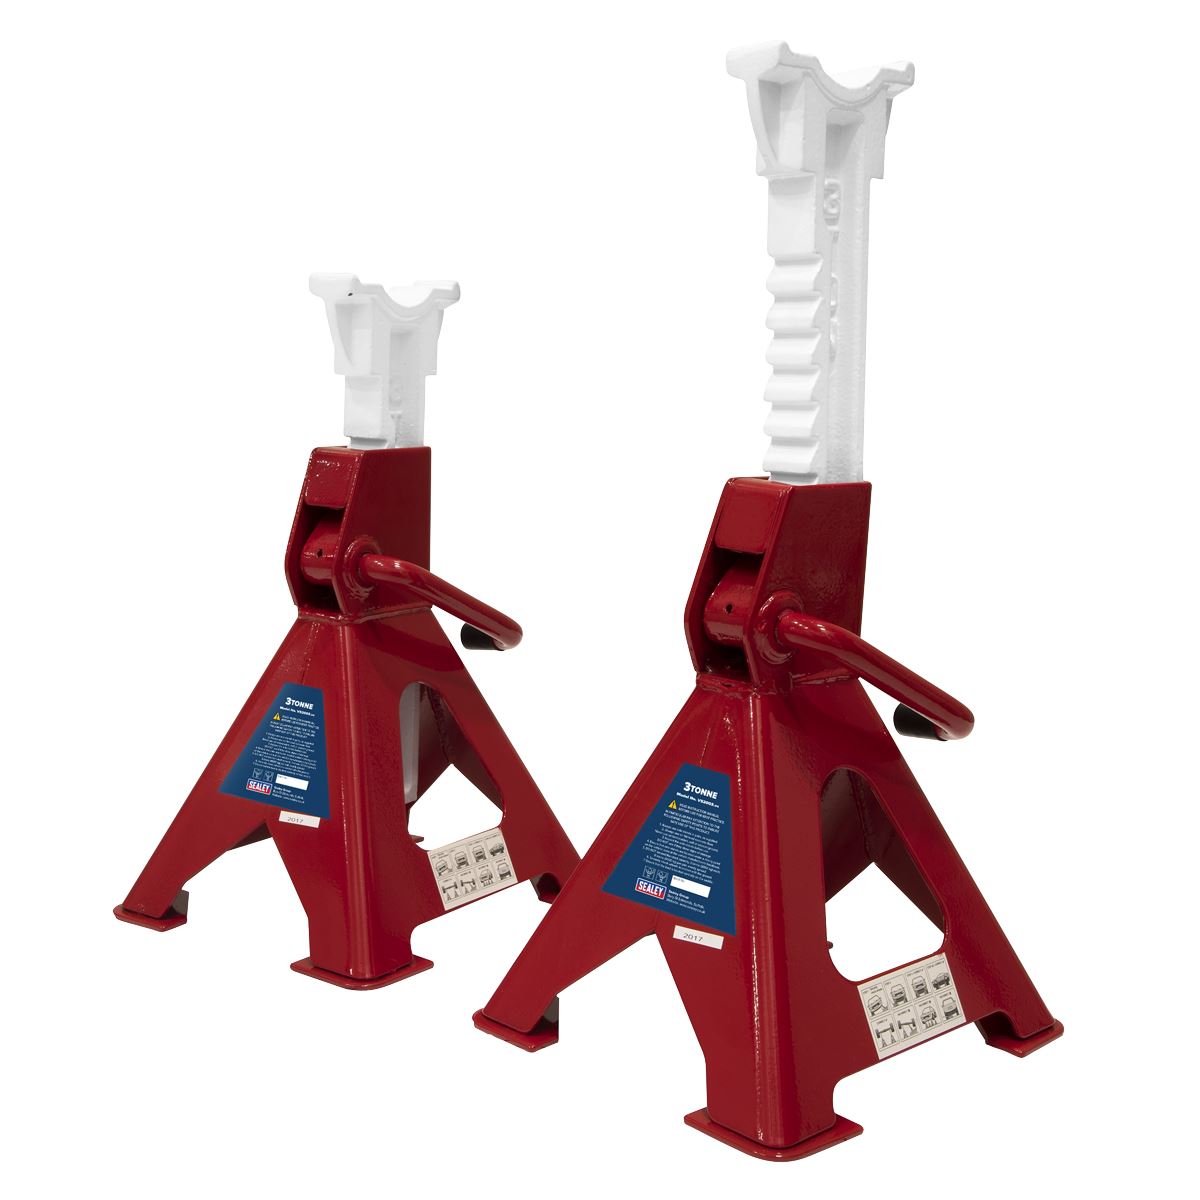 Sealey Axle Stands (Pair) 3 Tonne Capacity per Stand Ratchet Type